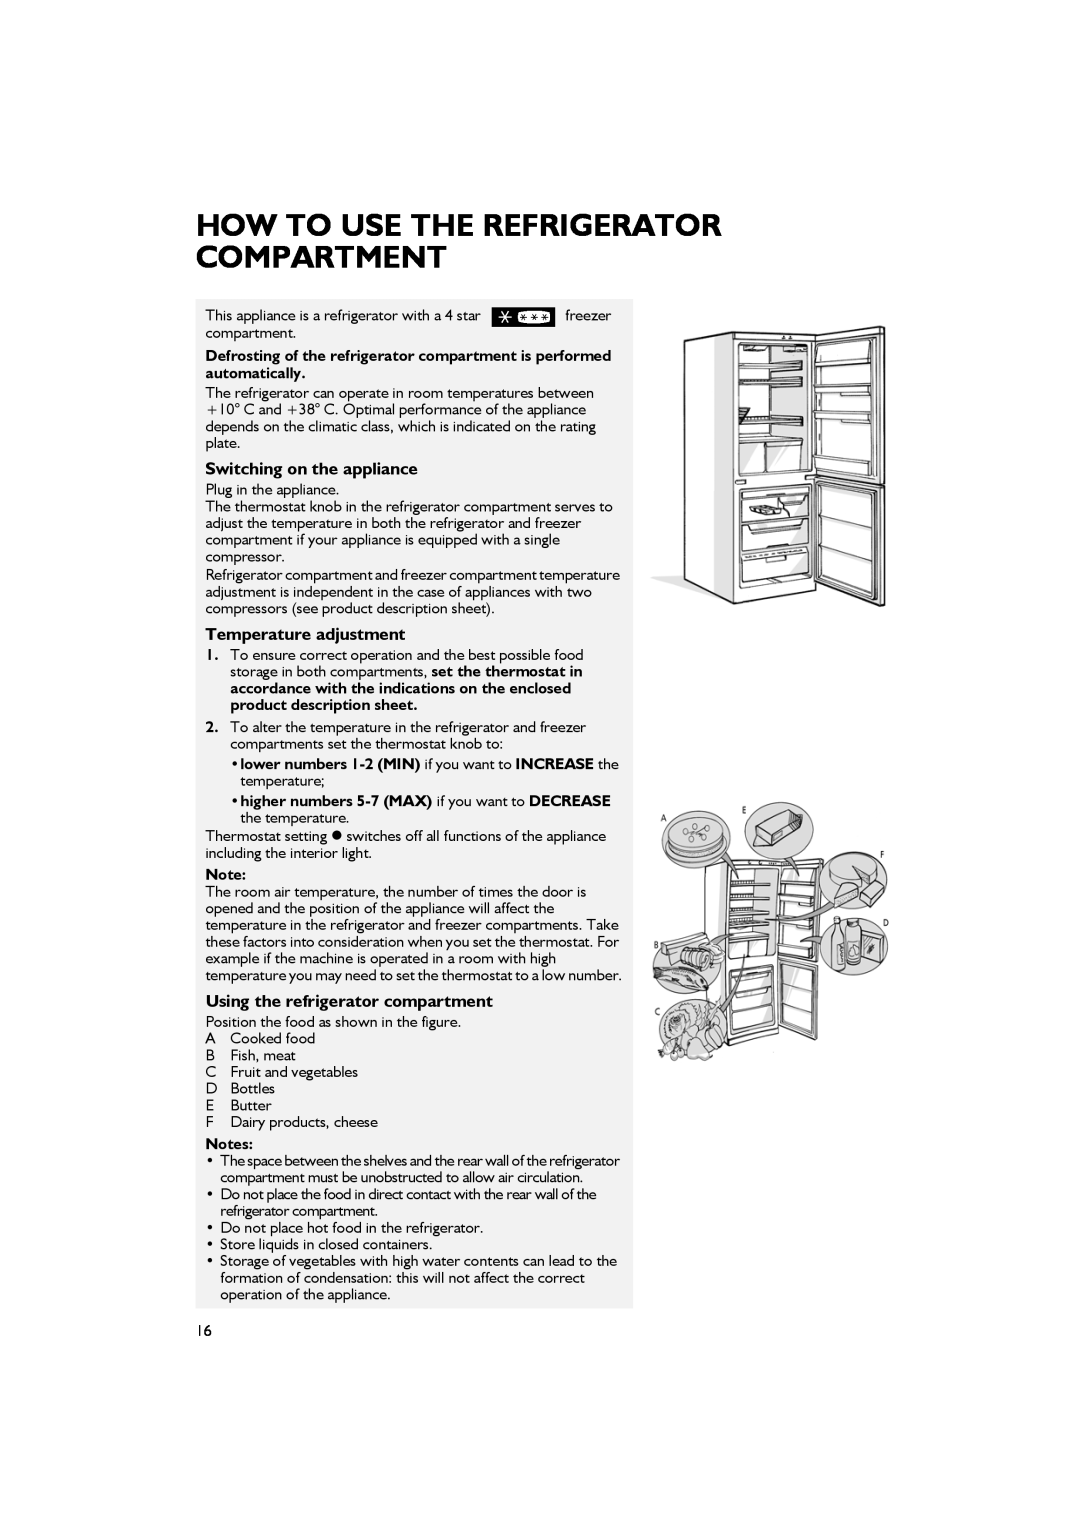 Smeg CR324A7, CR324ASX7 manual Switching on the appliance, Temperature adjustment, Using the refrigerator compartment 